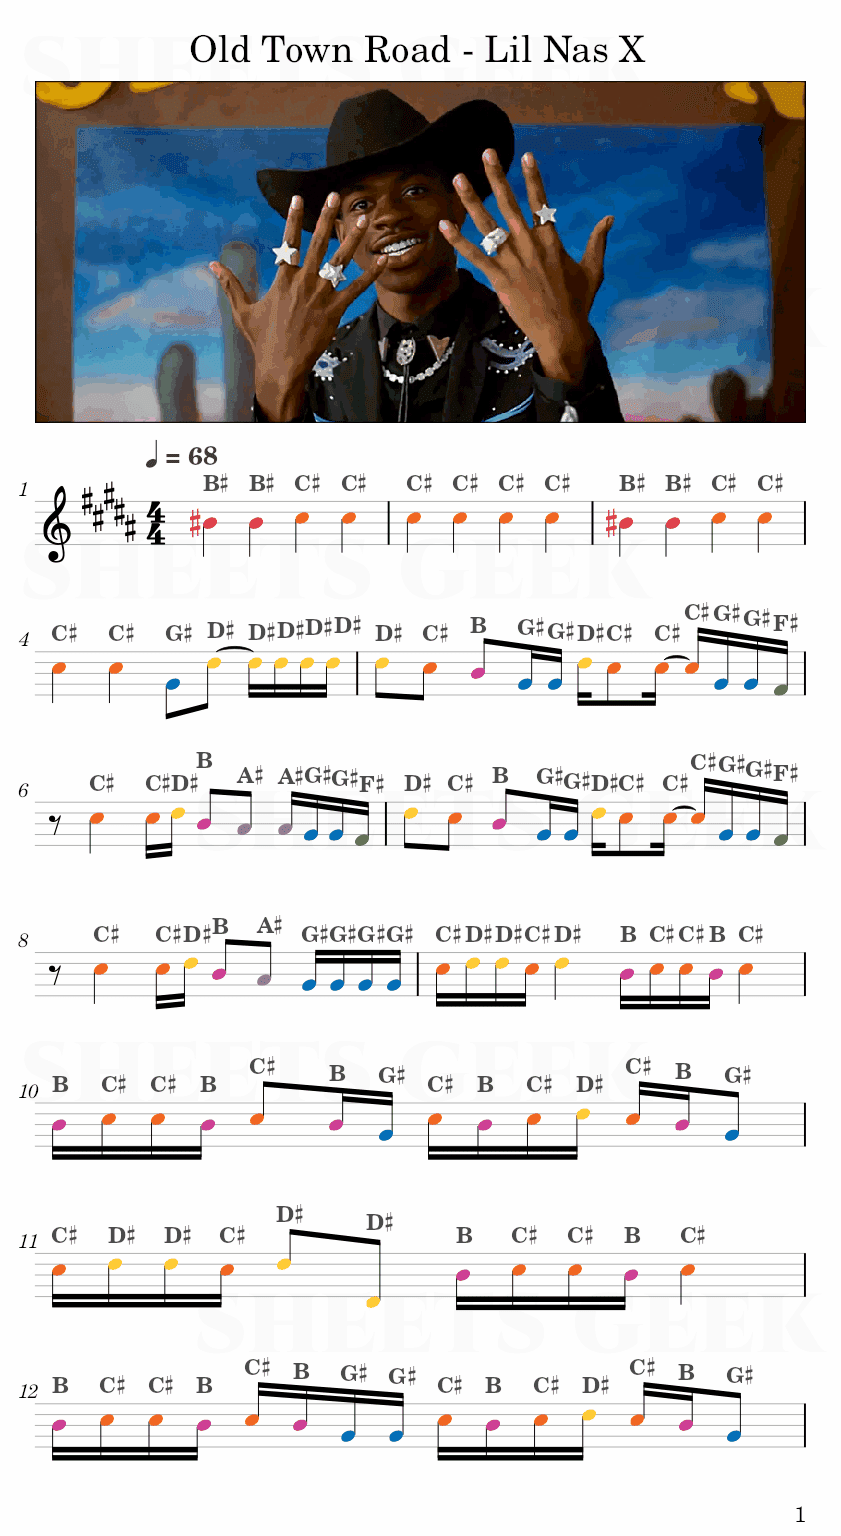 Old Town Road - Lil Nas X Easy Sheet Music Free for piano, keyboard, flute, violin, sax, cello page 1